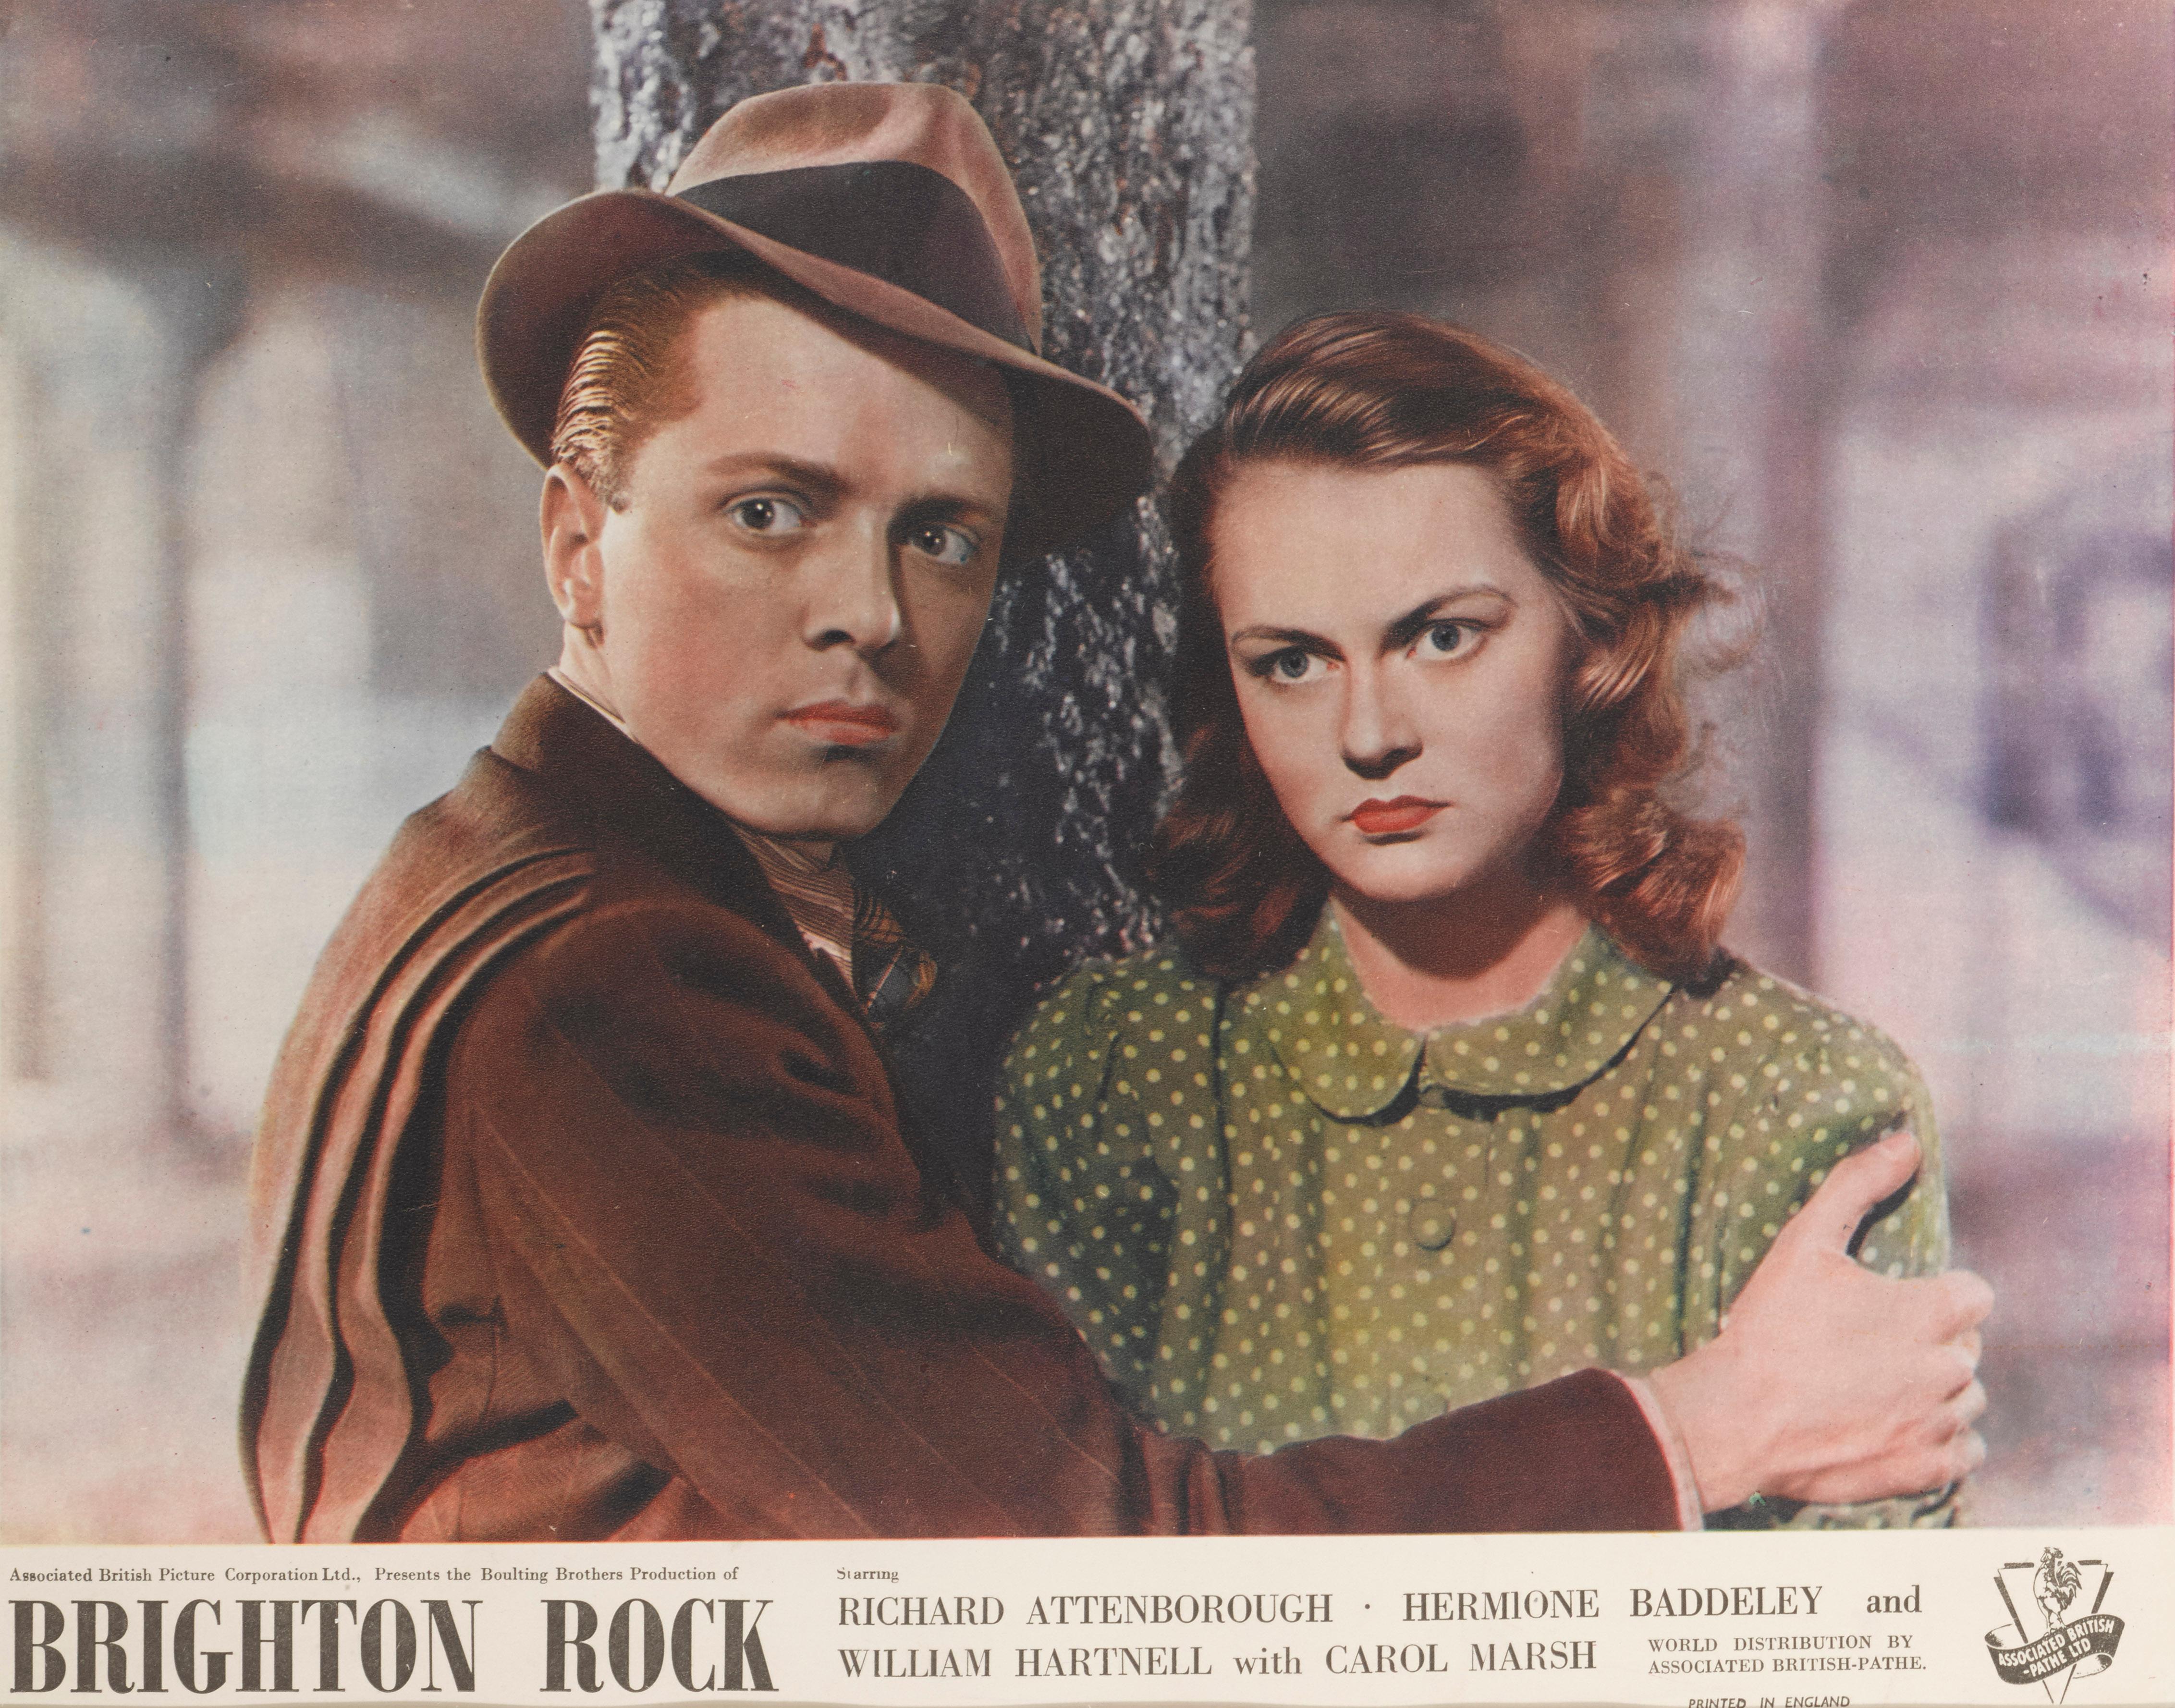 Original British lobby card for the 1948 Thriller Brighton Rock.
This film was directed by John Boulting and starred Richard Attenborough, Hermonie Baddeley, William Hartnell. This piece is conservation framed in an Obeche an wood frame with acid